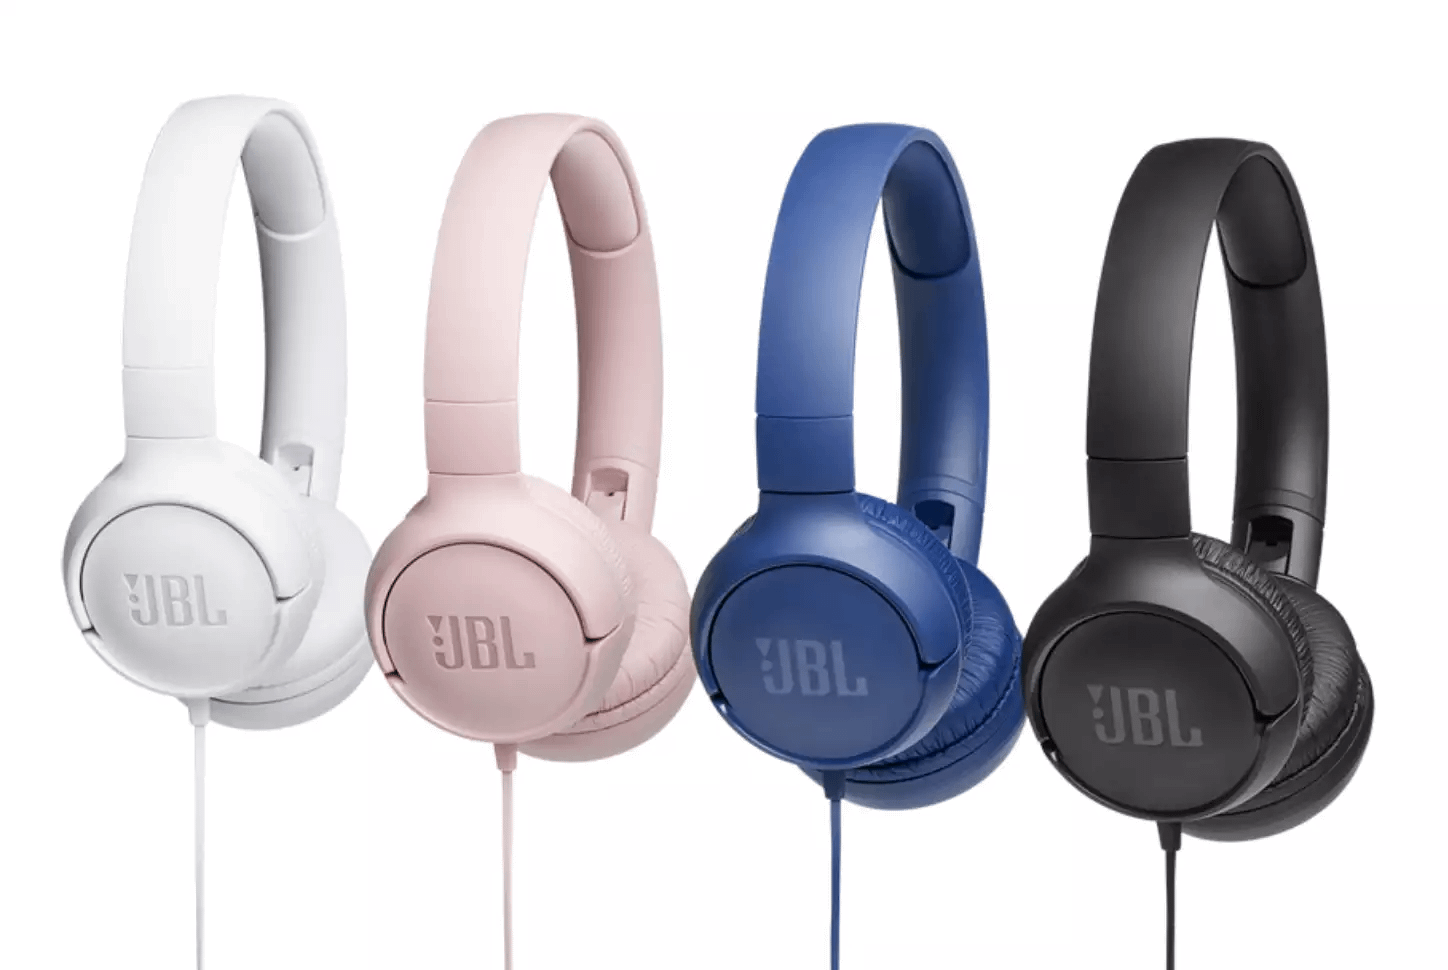 JBL headphones in four different colors: white, pink, blue and black.